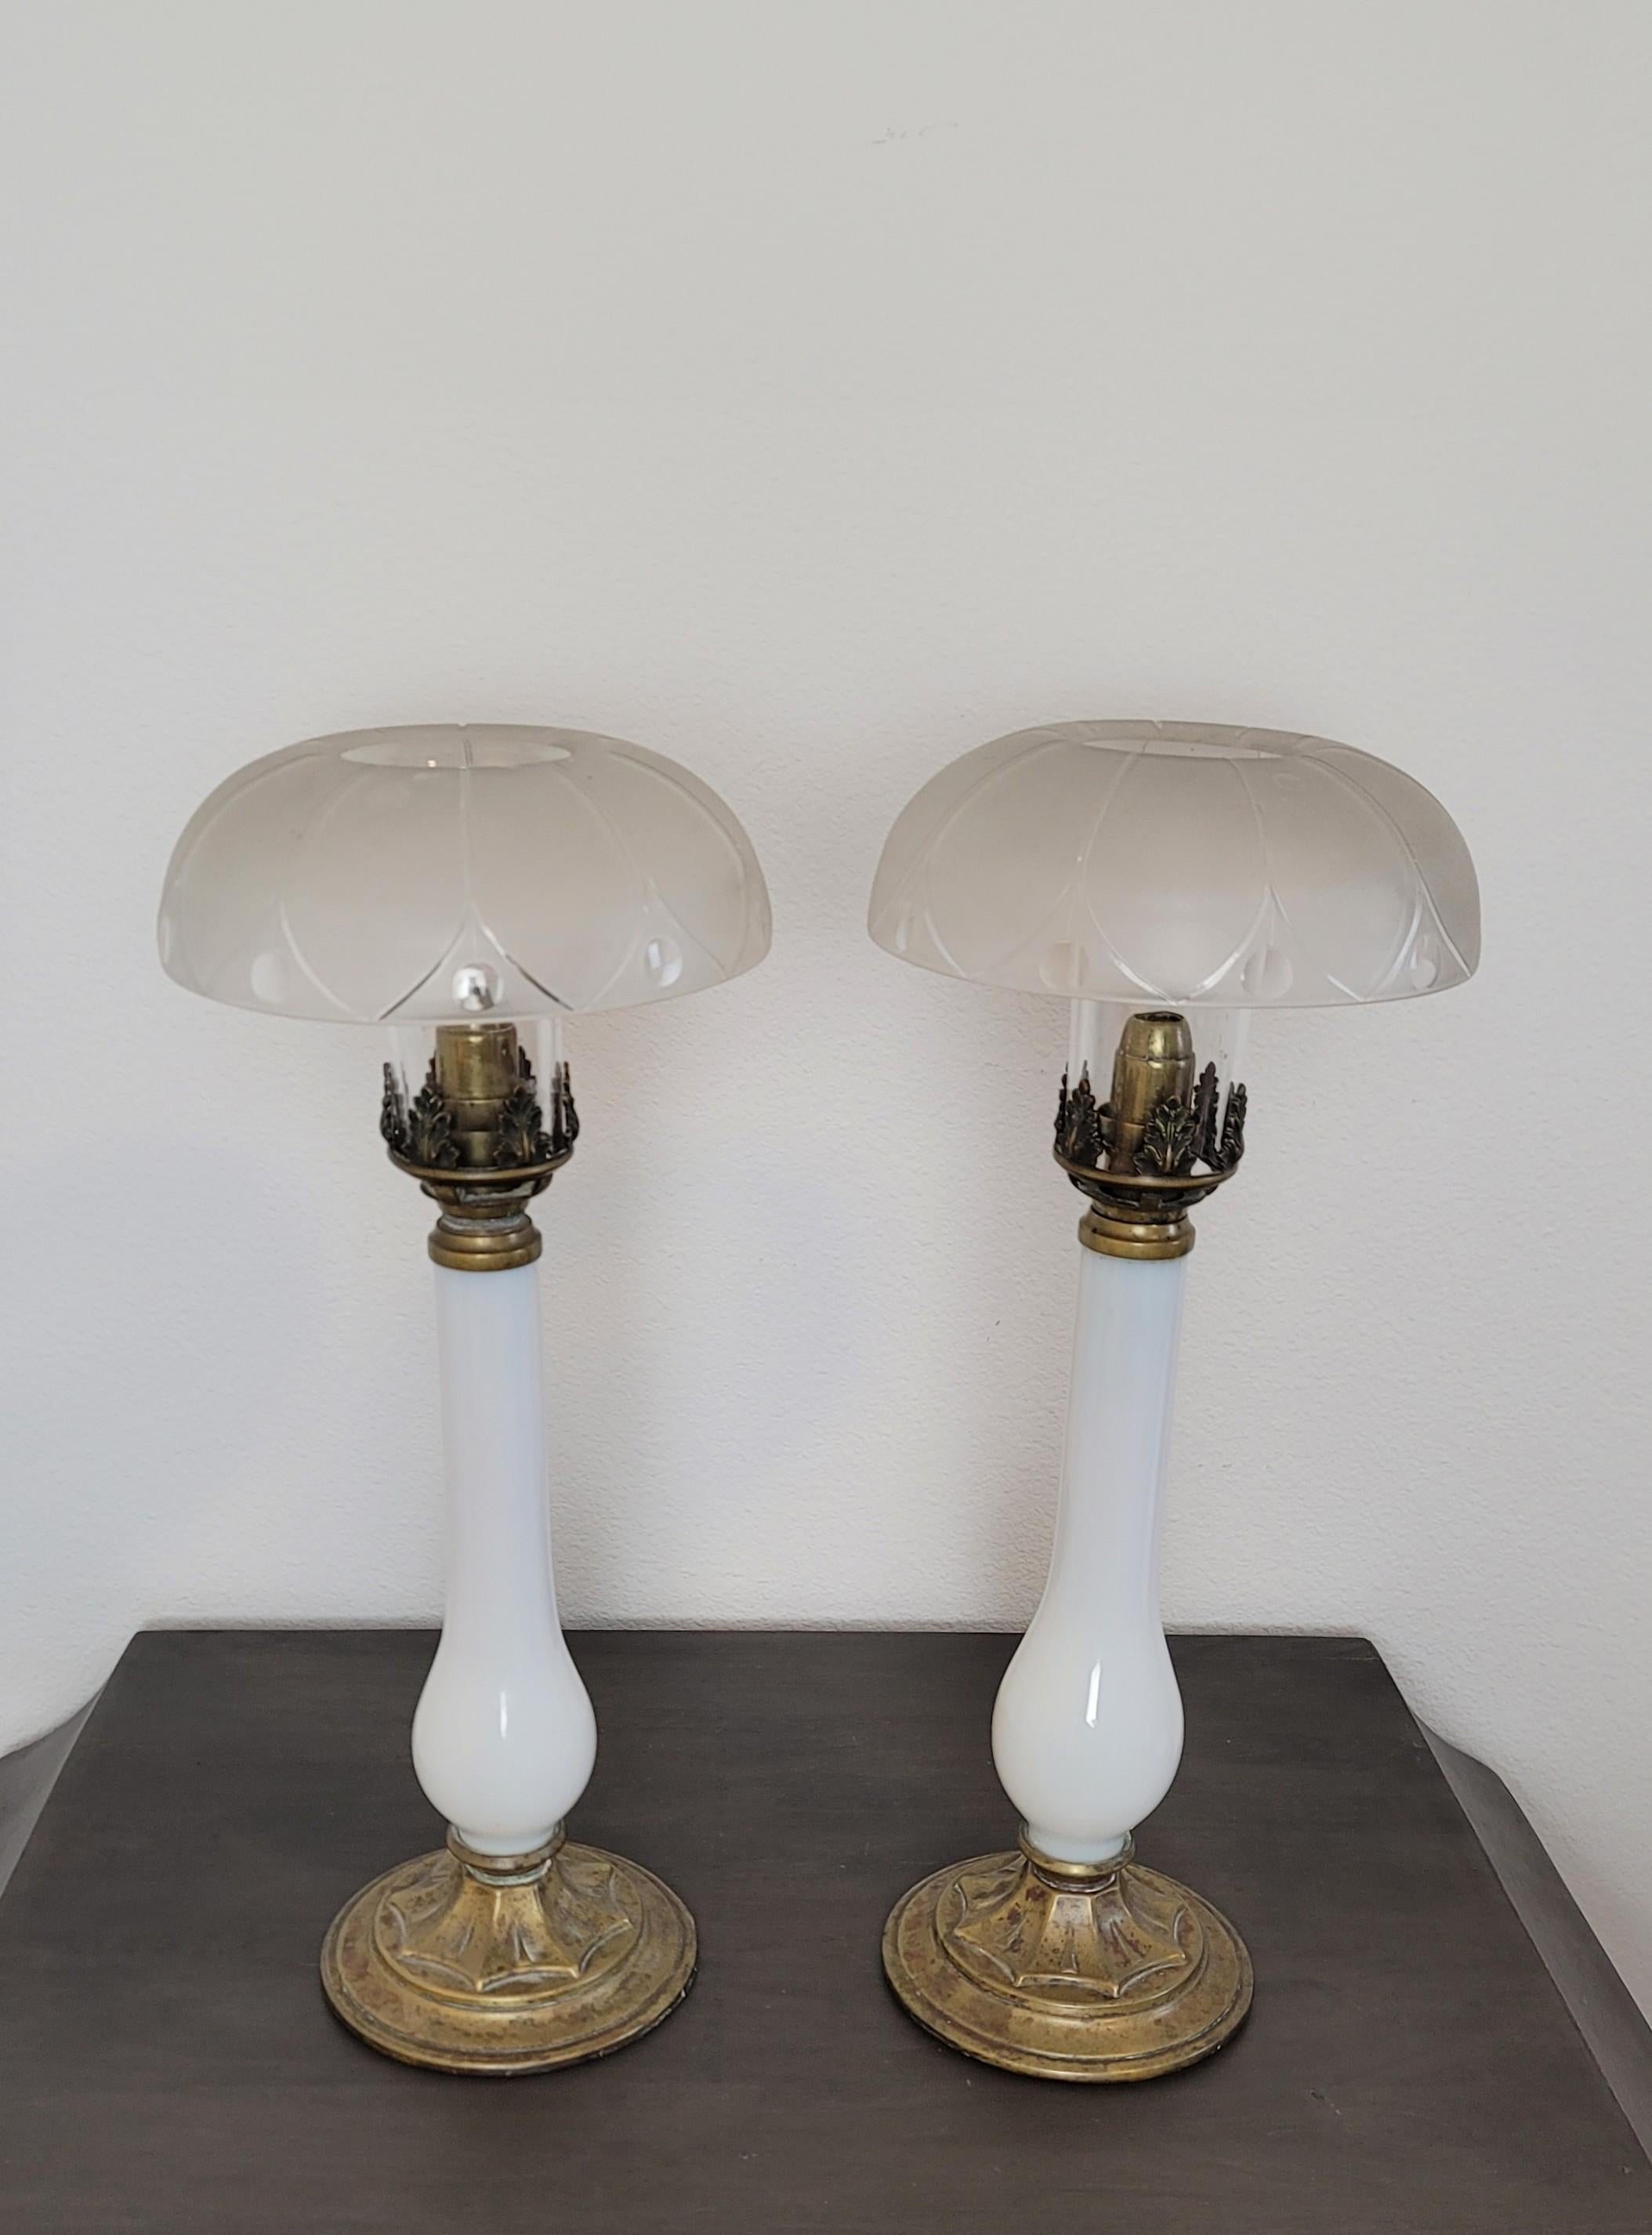 Elegant sophistication at its finest, we present this exceptionally rare pair of early 19th century fine quality French Empire Period candlestick lamps.

The original antique table lamps complete, with clear and frosted glass lotus hurricane shades,